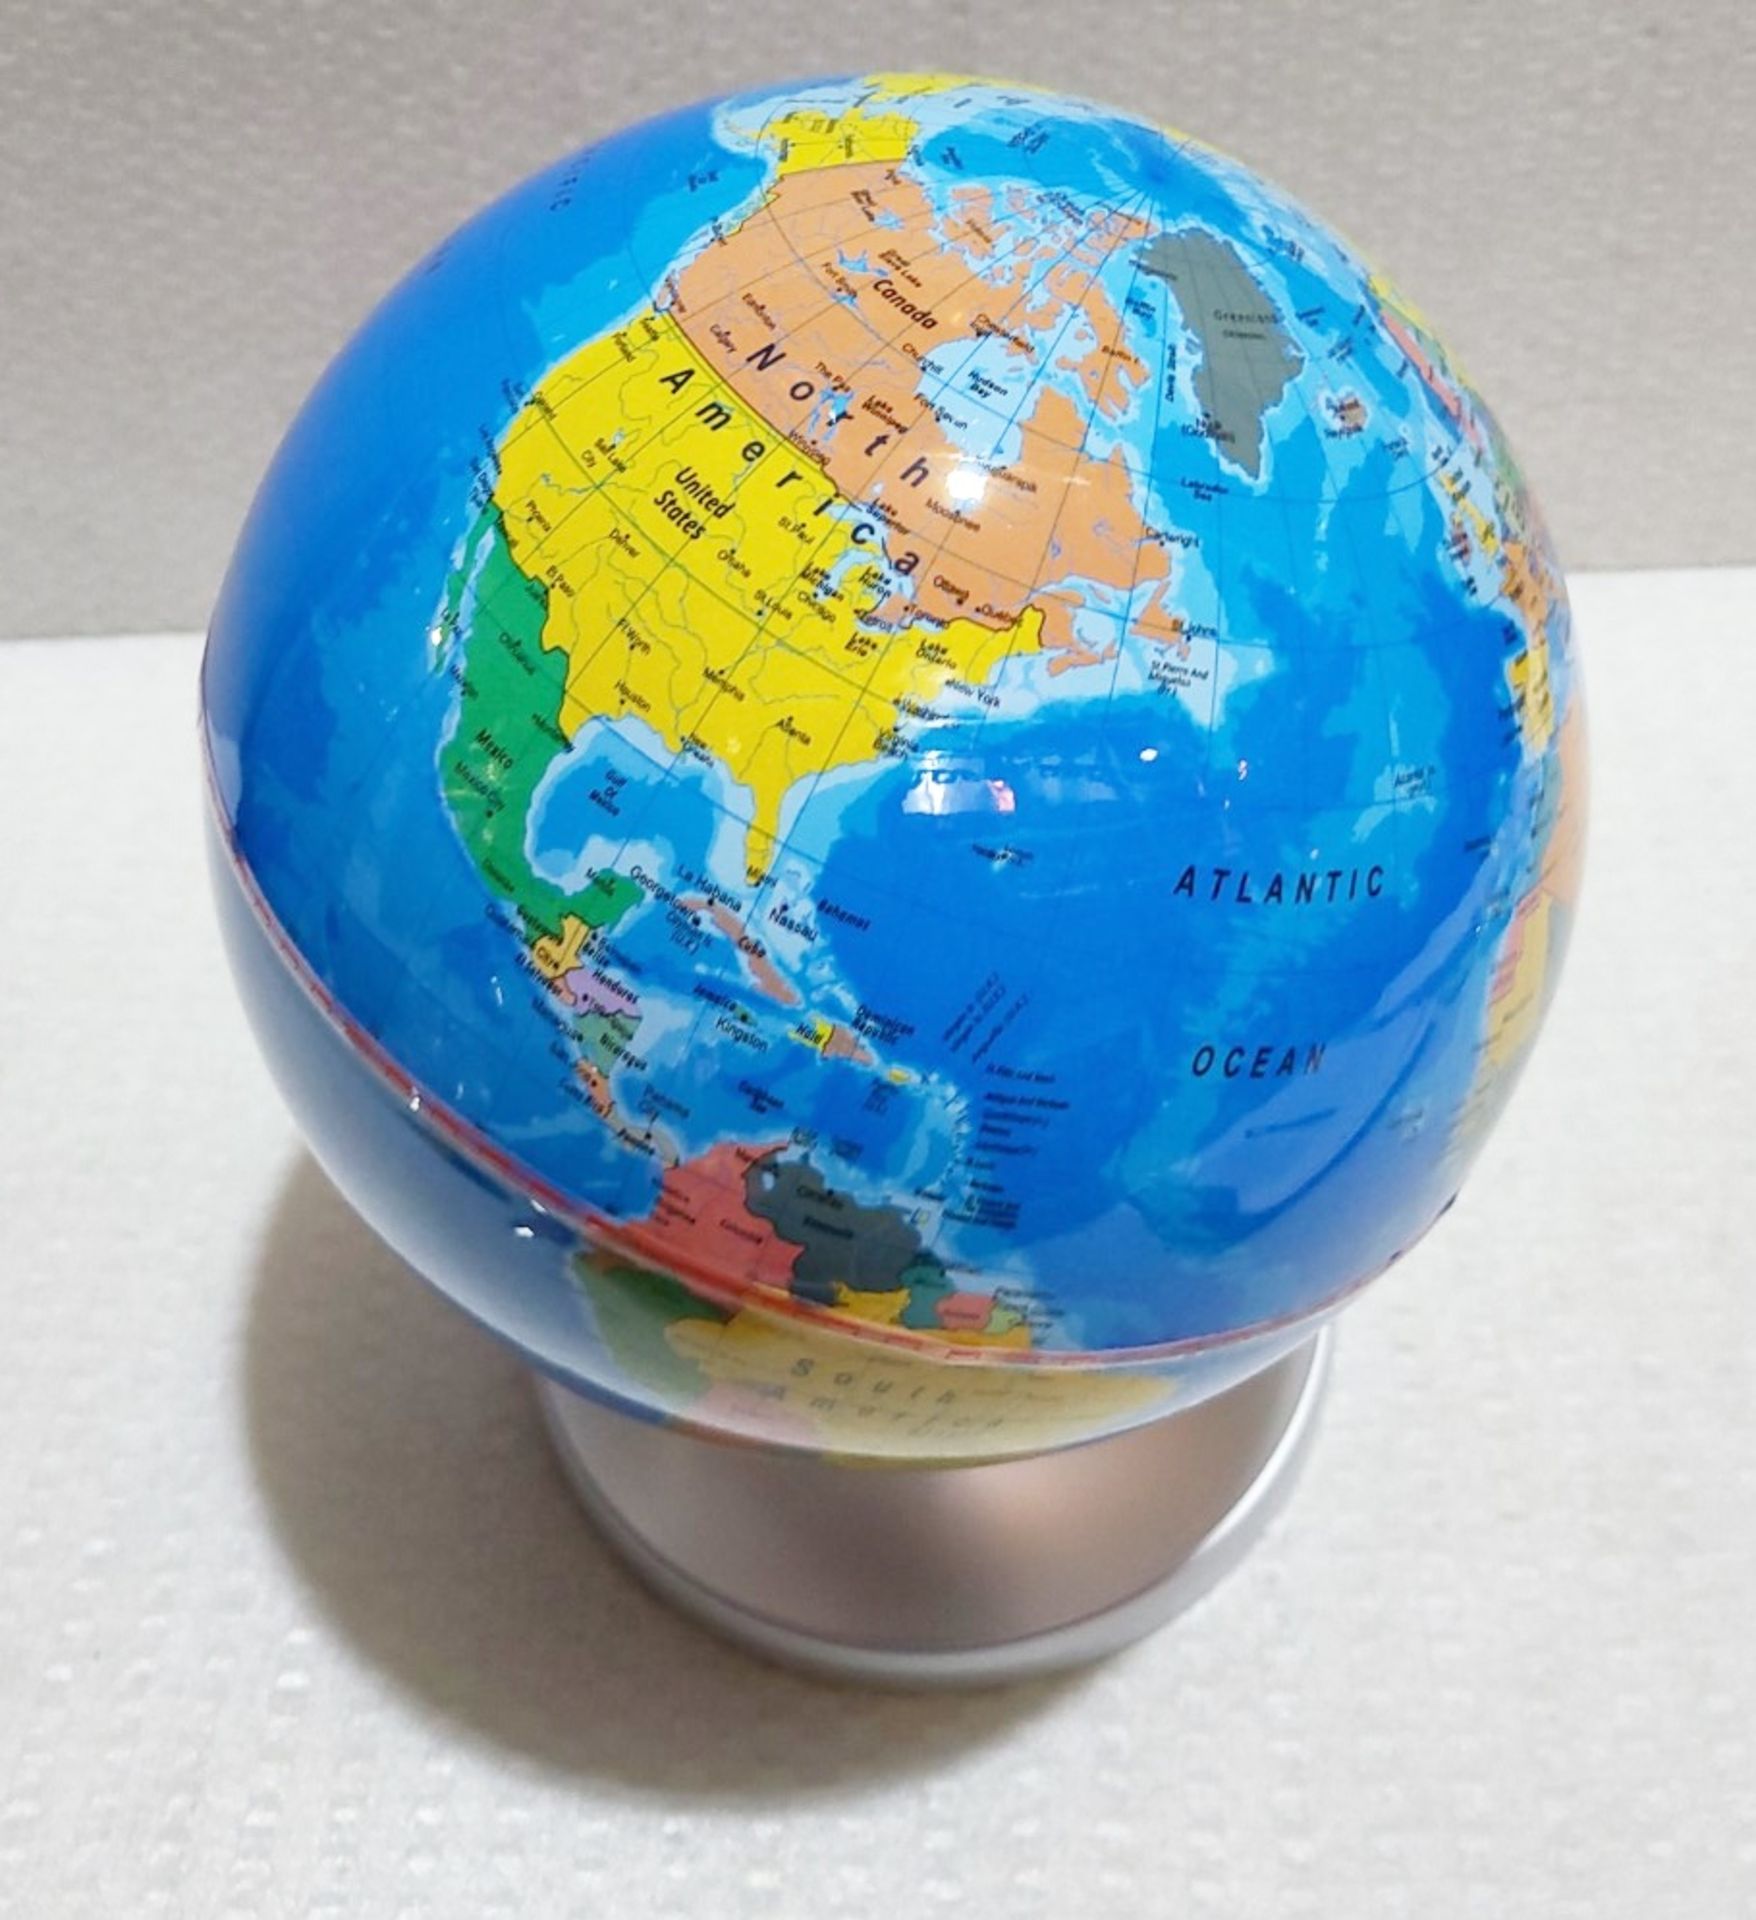 1 x DISCOVERY Kids 2-In-1 World Globe Led Lamp With Day & Night Modes - New / Unused Boxed Stock - Image 7 of 7